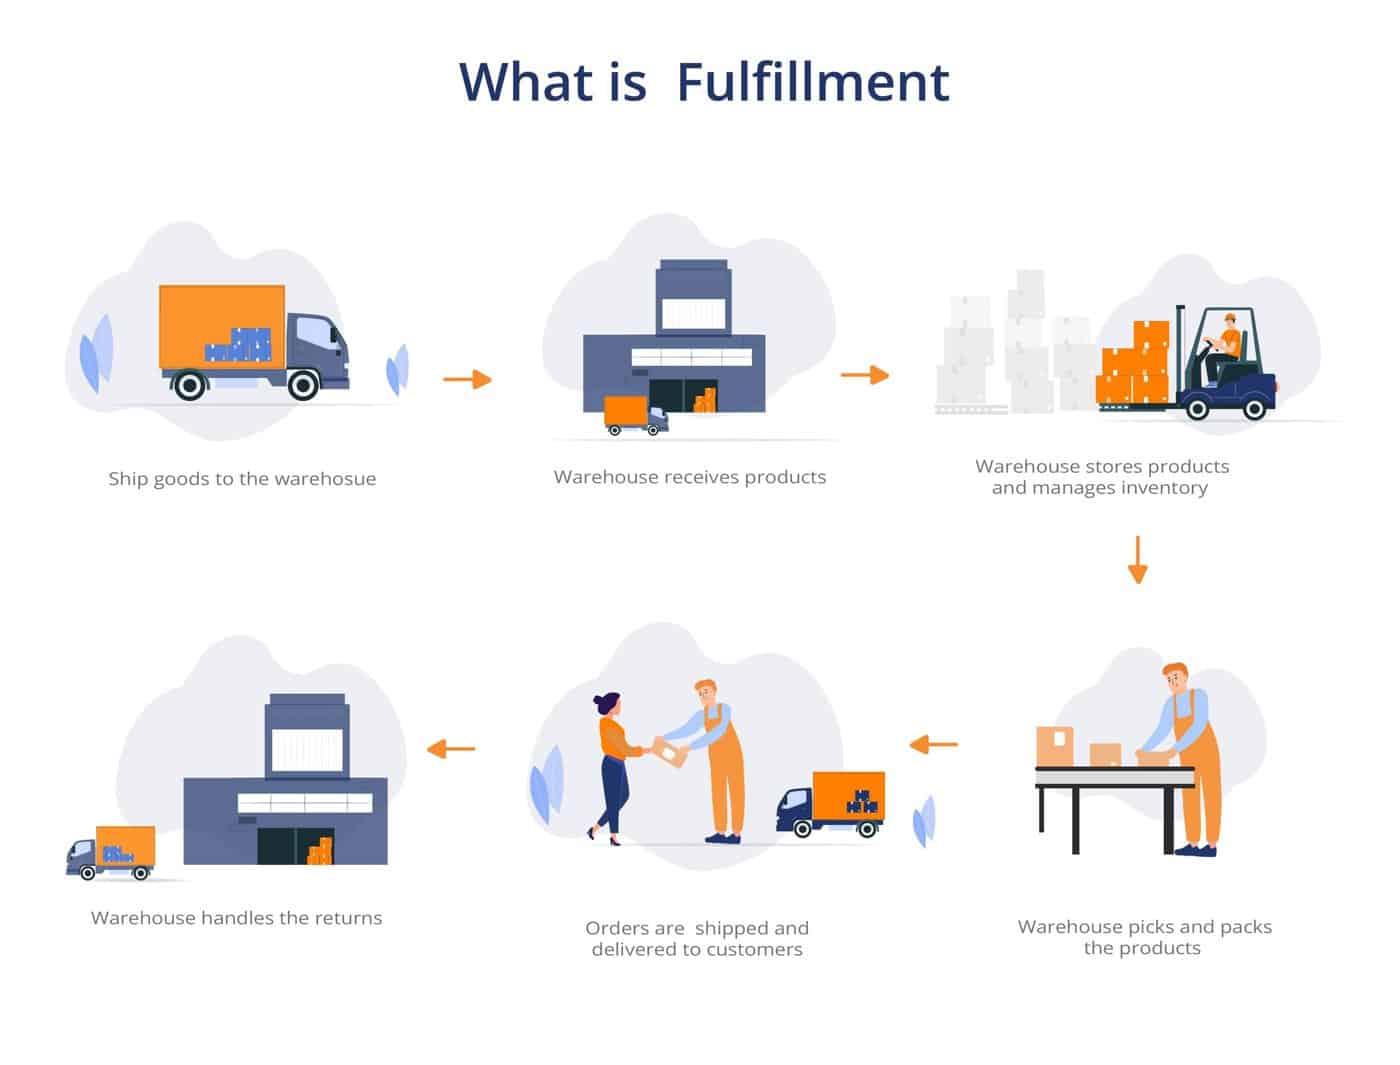 What are fulfillment services